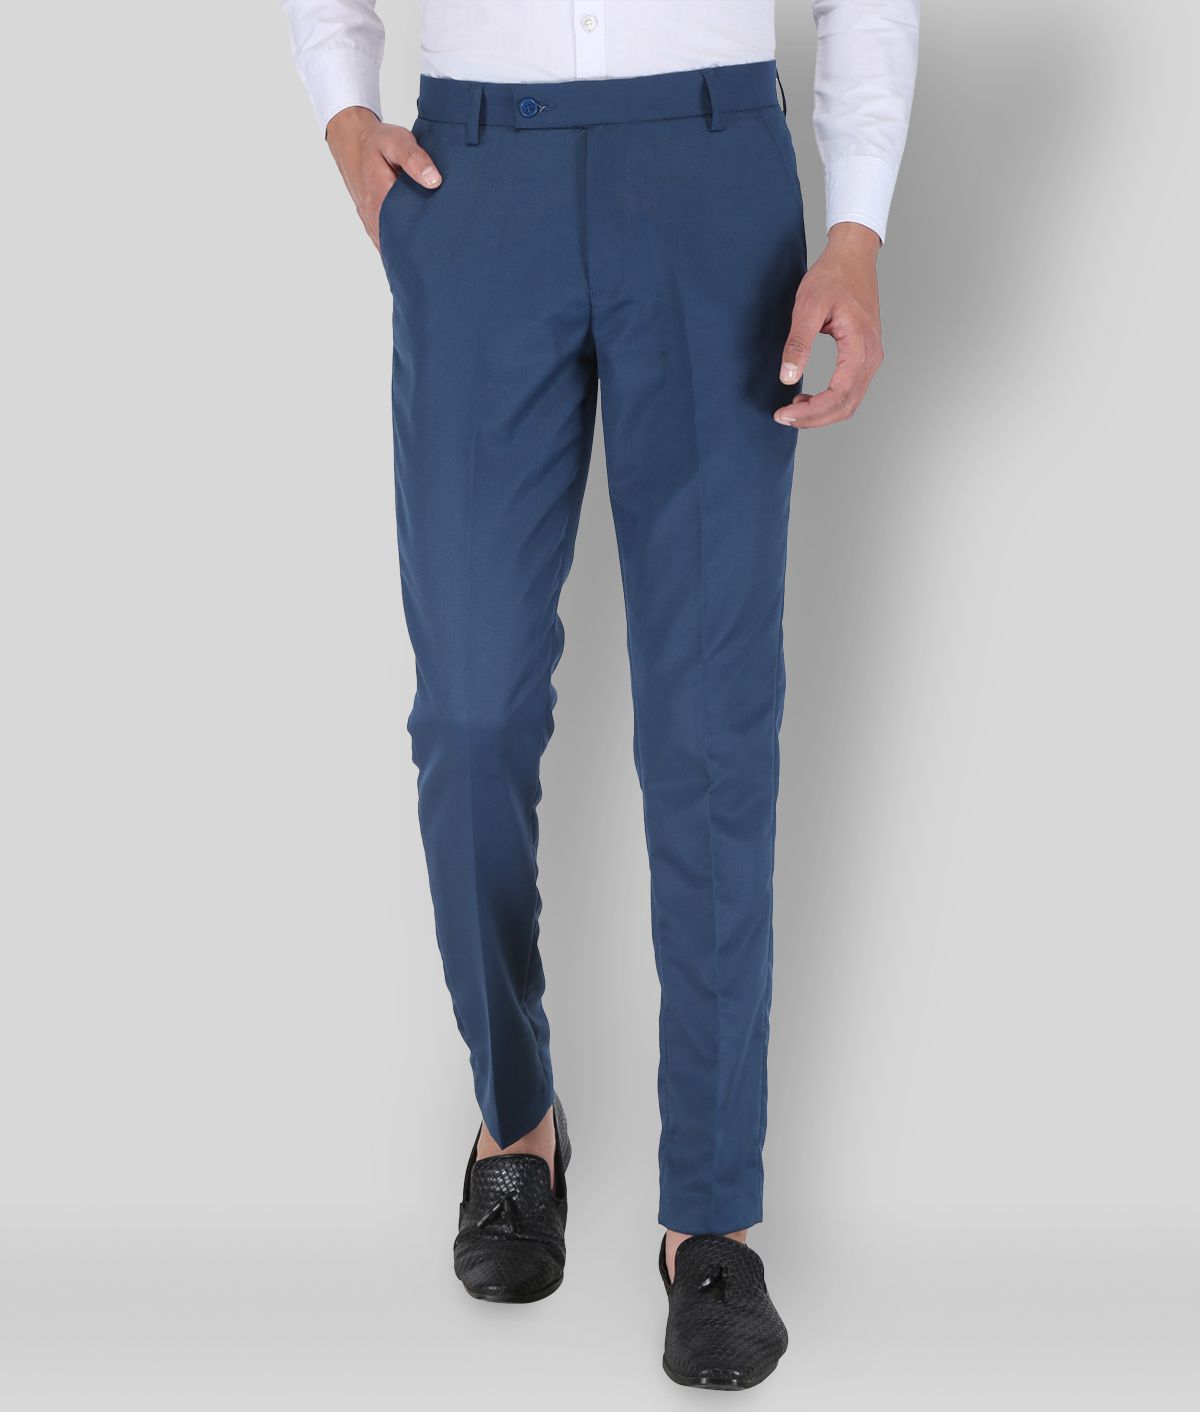     			Playerz - Blue Polycotton Slim - Fit Men's Trousers ( Pack of 1 )